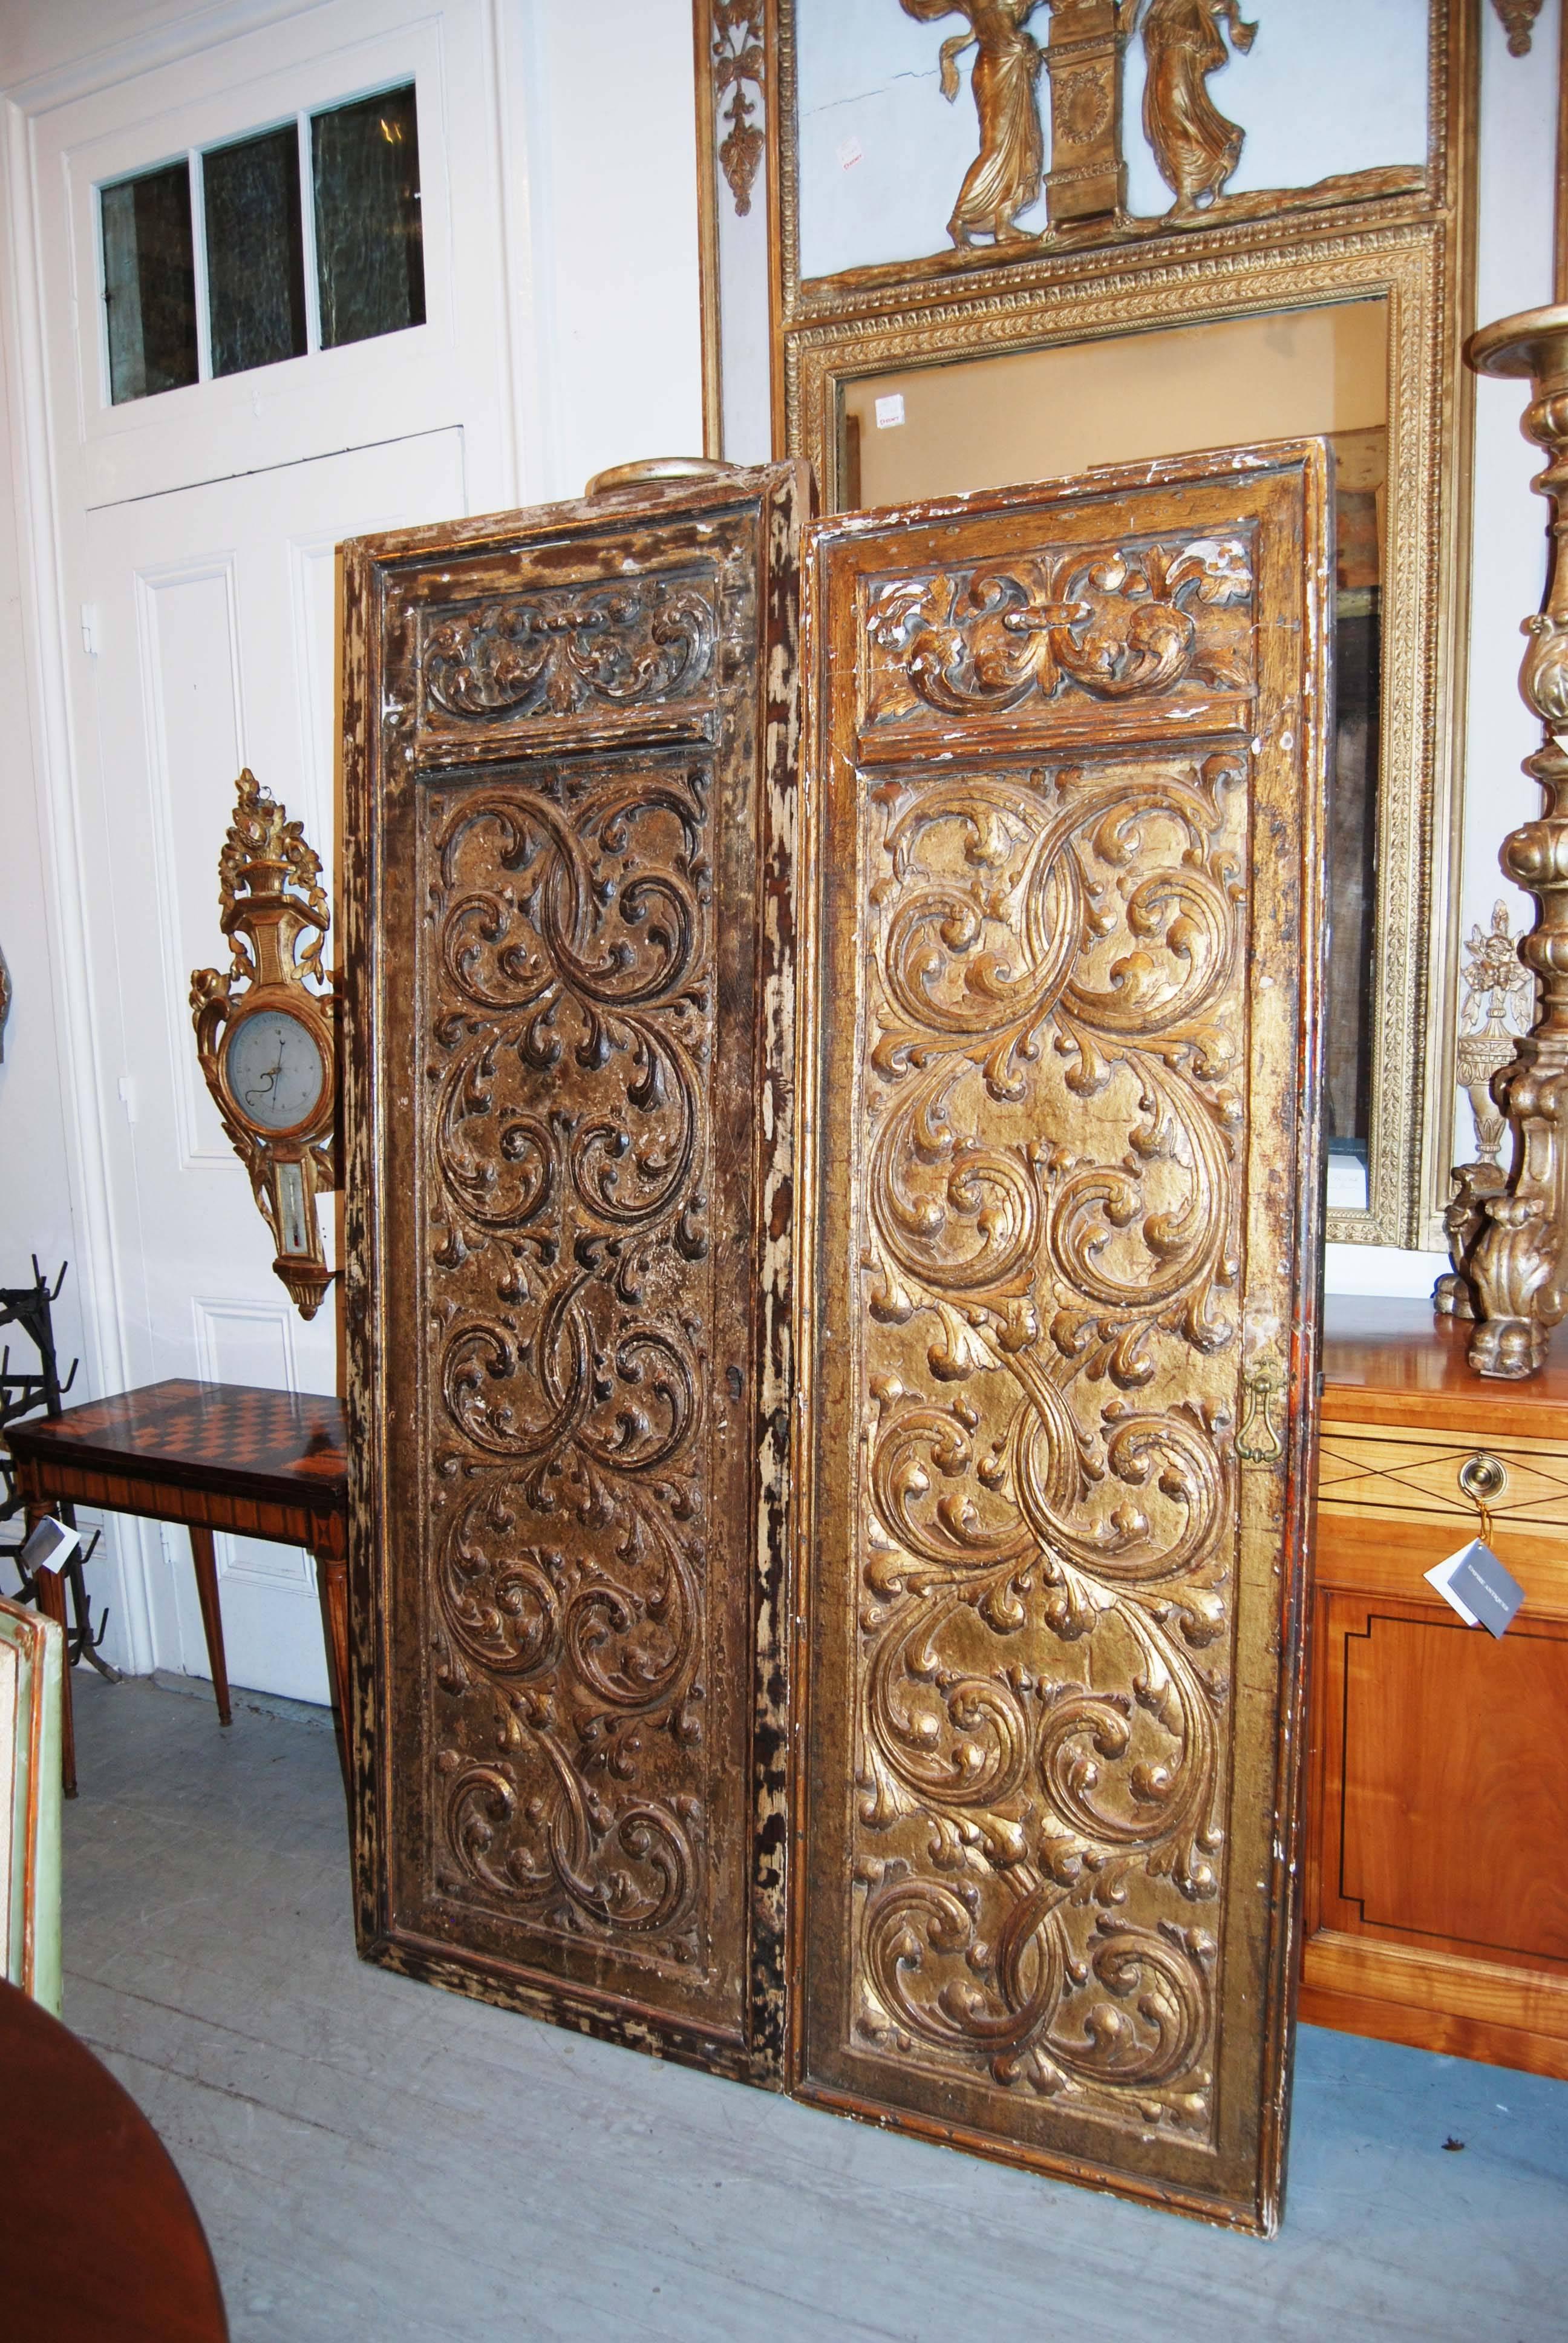 Two beautifully carved and gilded doors. The patterns appear to be the same but the size differs.
Largest door
Measures: 82 high
28.75 wide
2 depth.